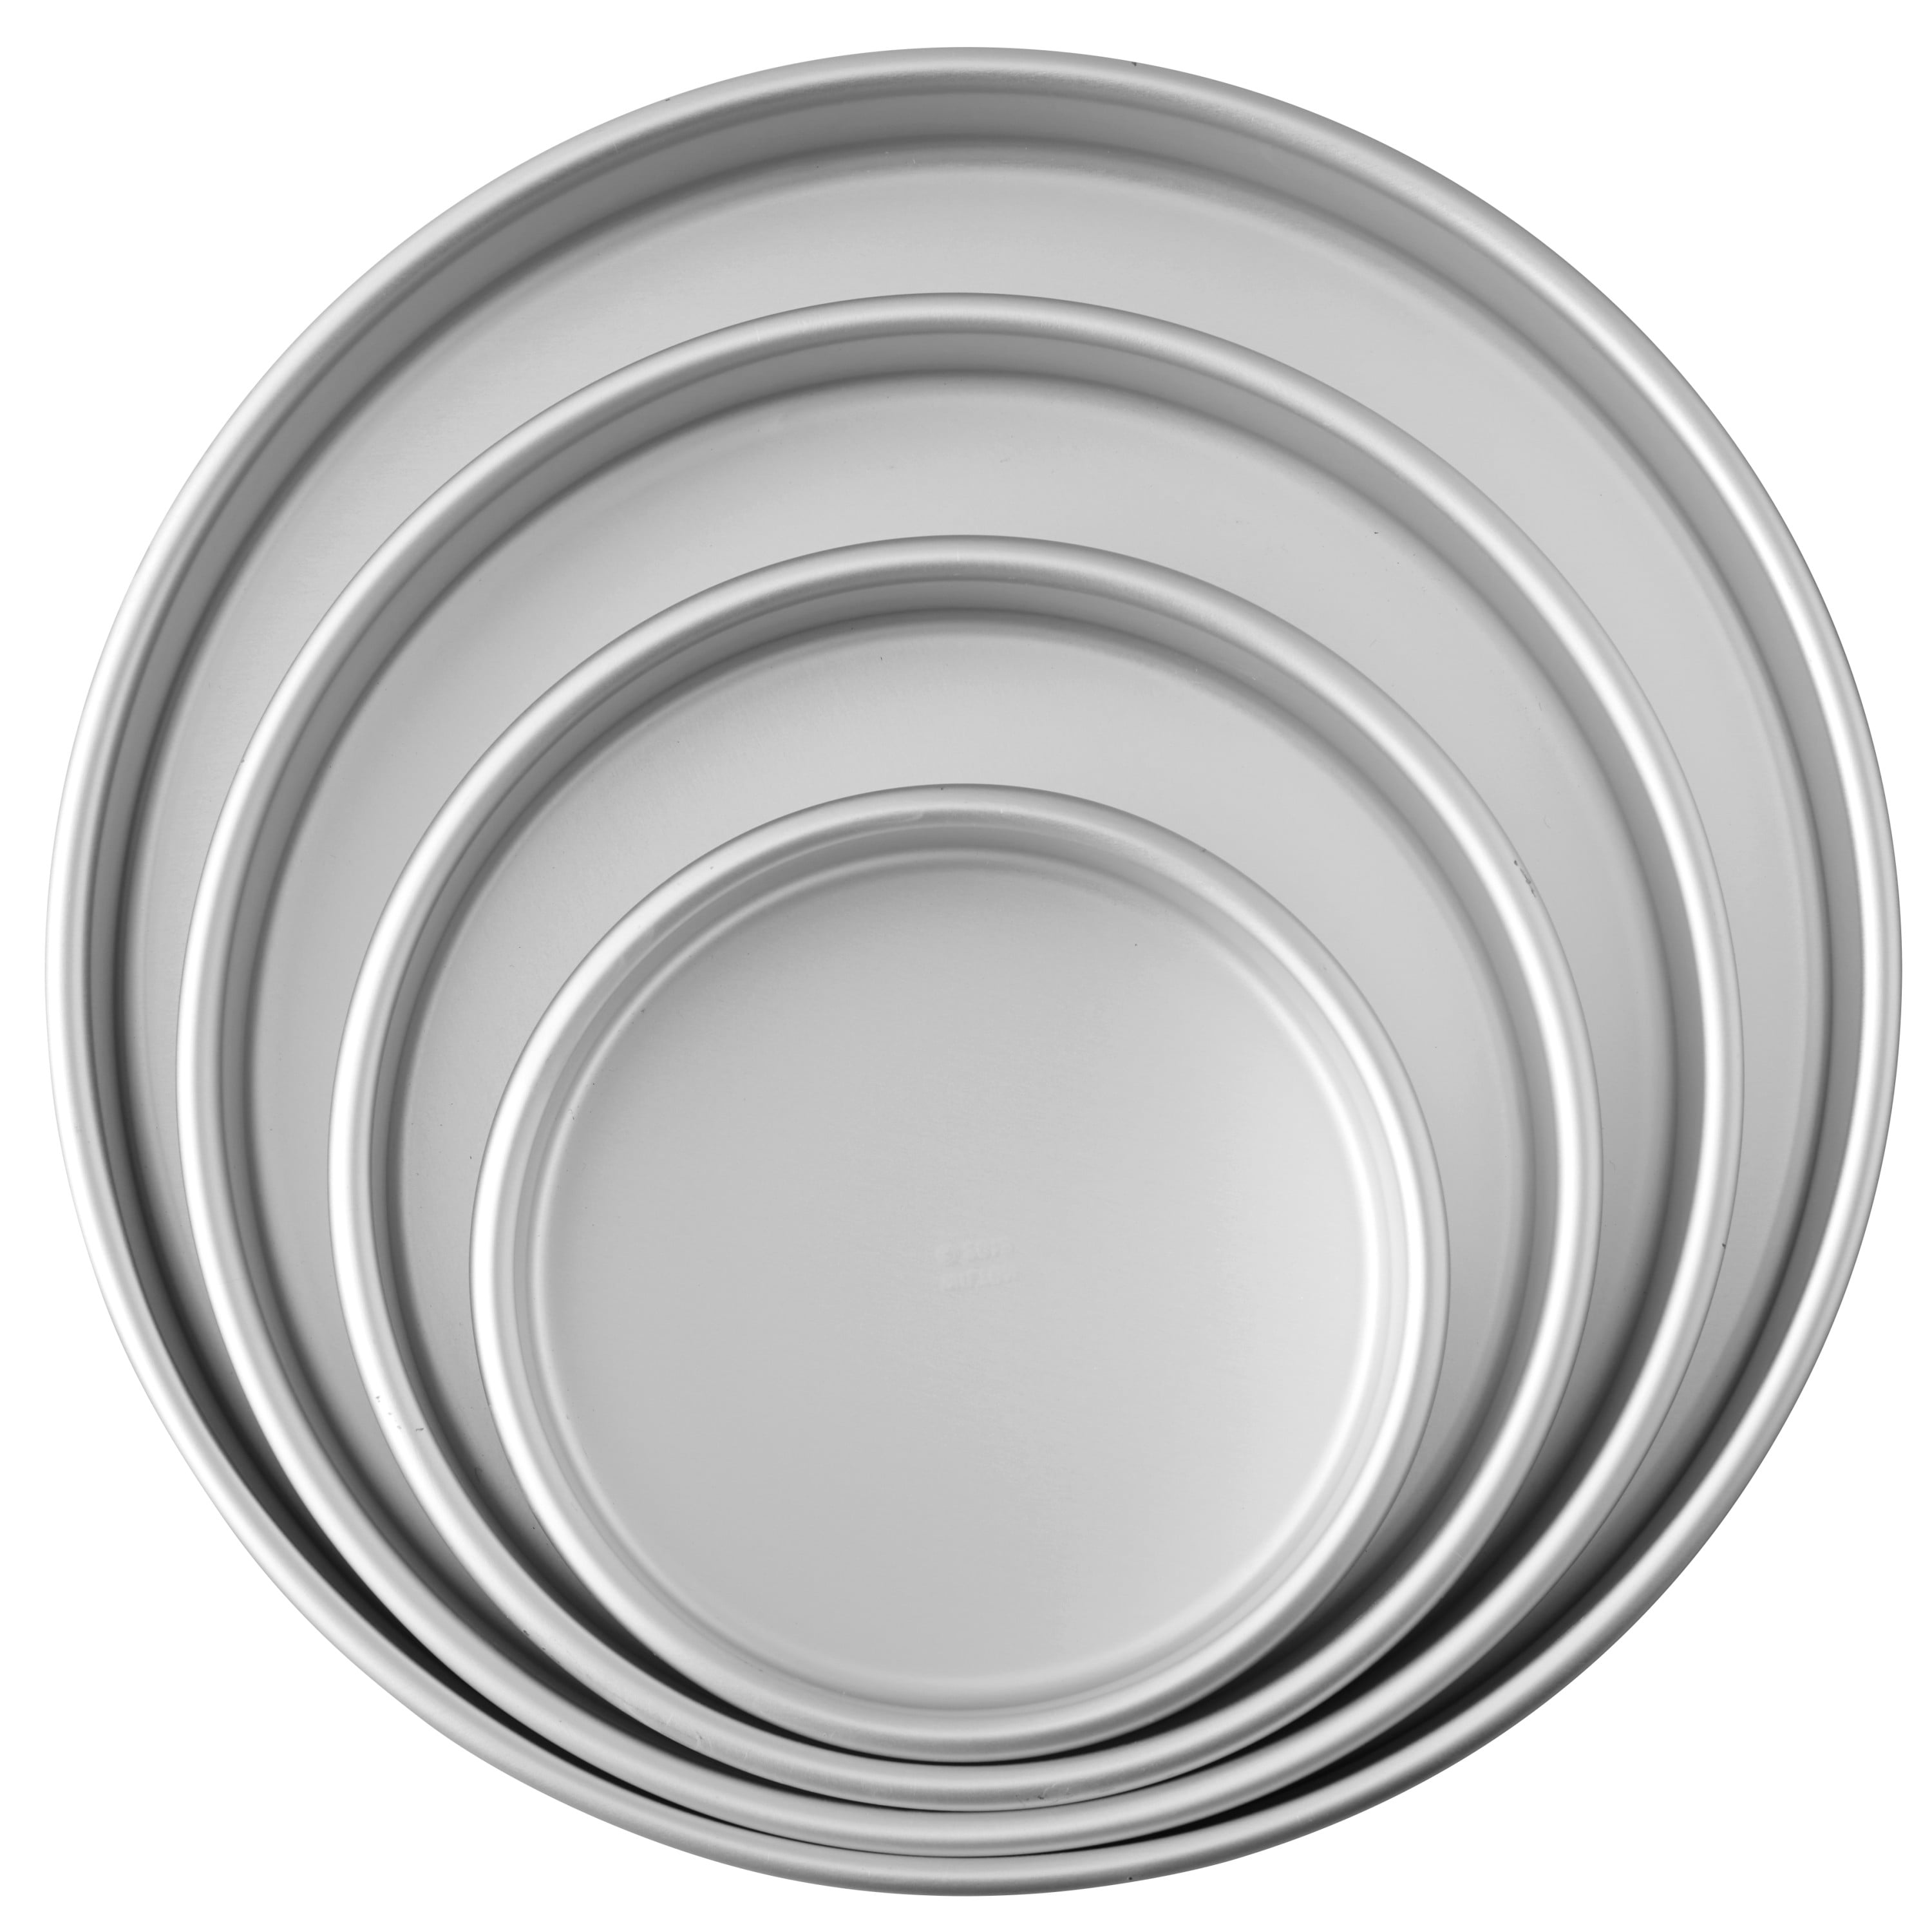 Wilton Aluminum Performance Pans 8 x 2 Inches Round Cake Pan Pack of 4 